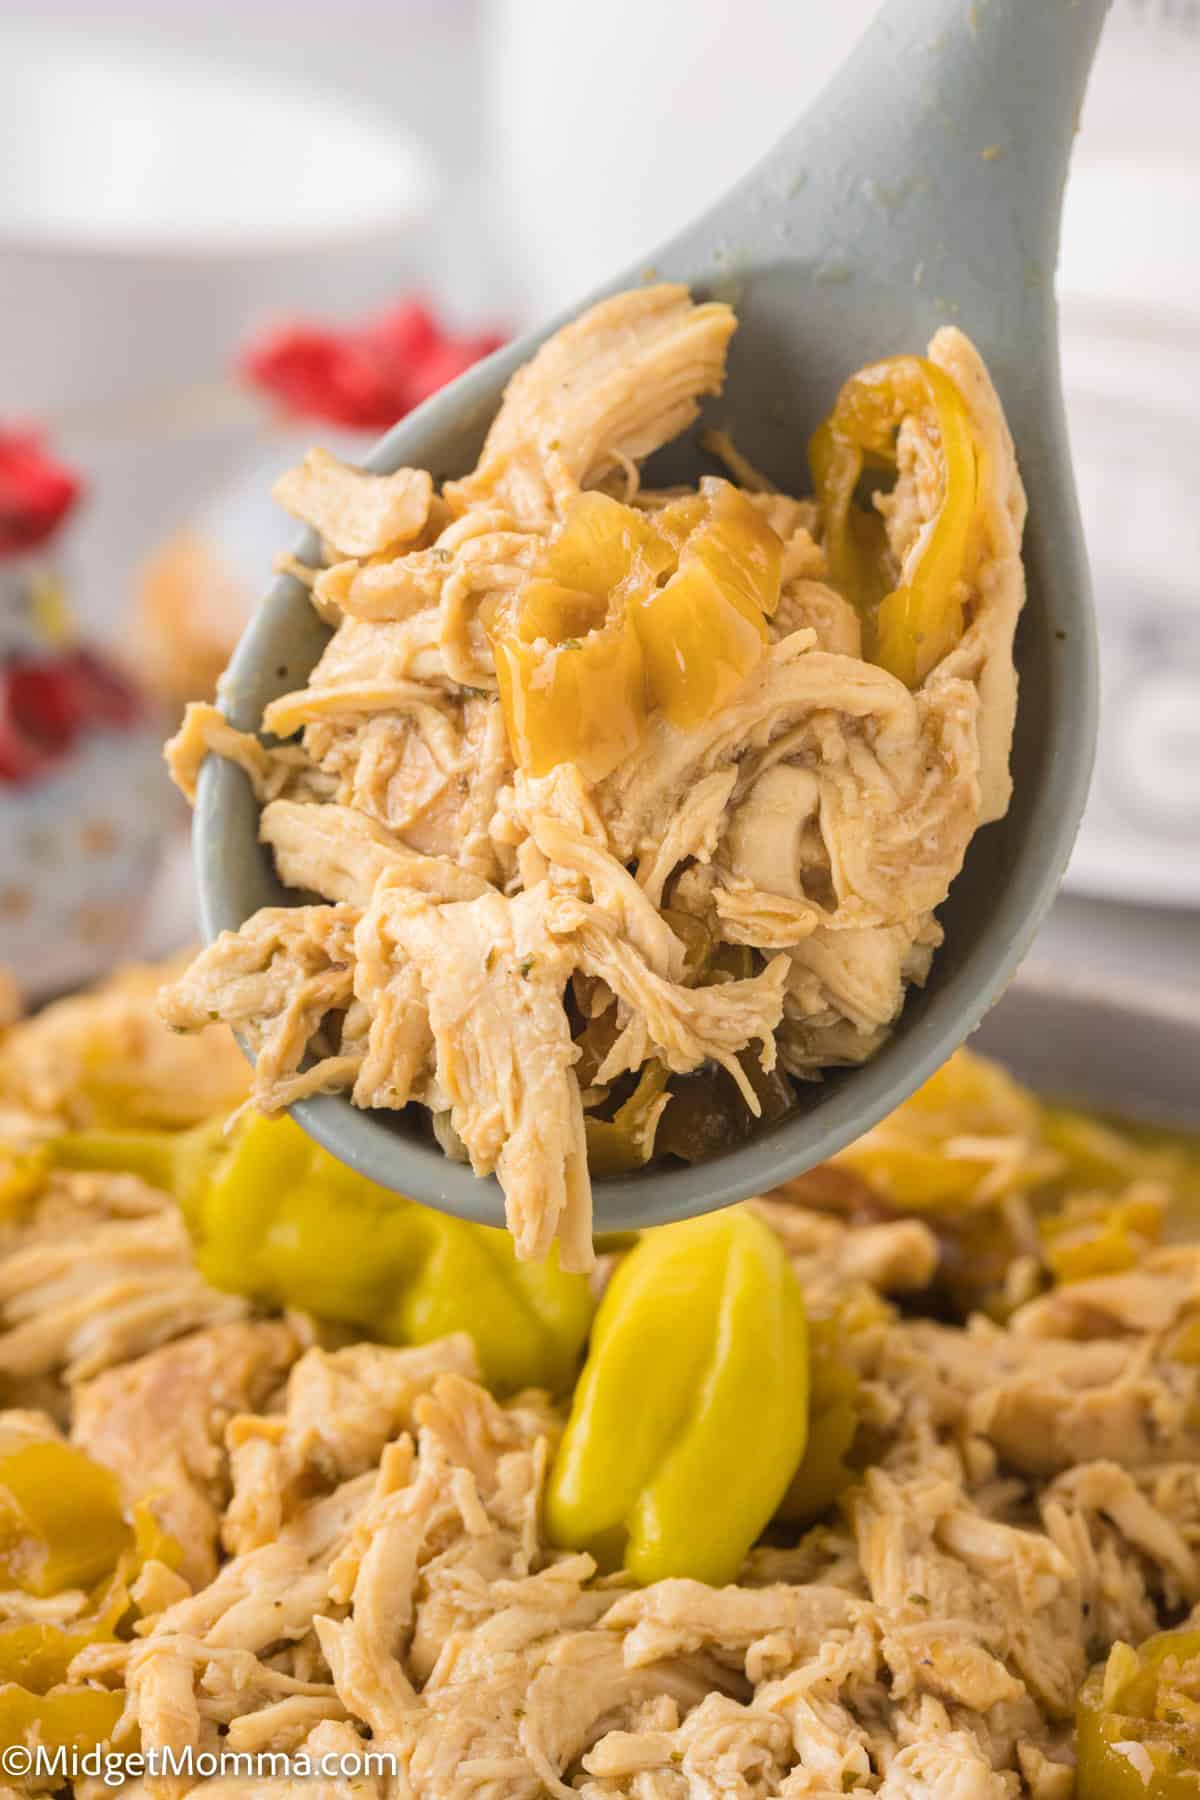 Shredded Mississippi chicken and sliced pepperoncini peppers are held above in a ladle over a dish of cooked mississippi chicken